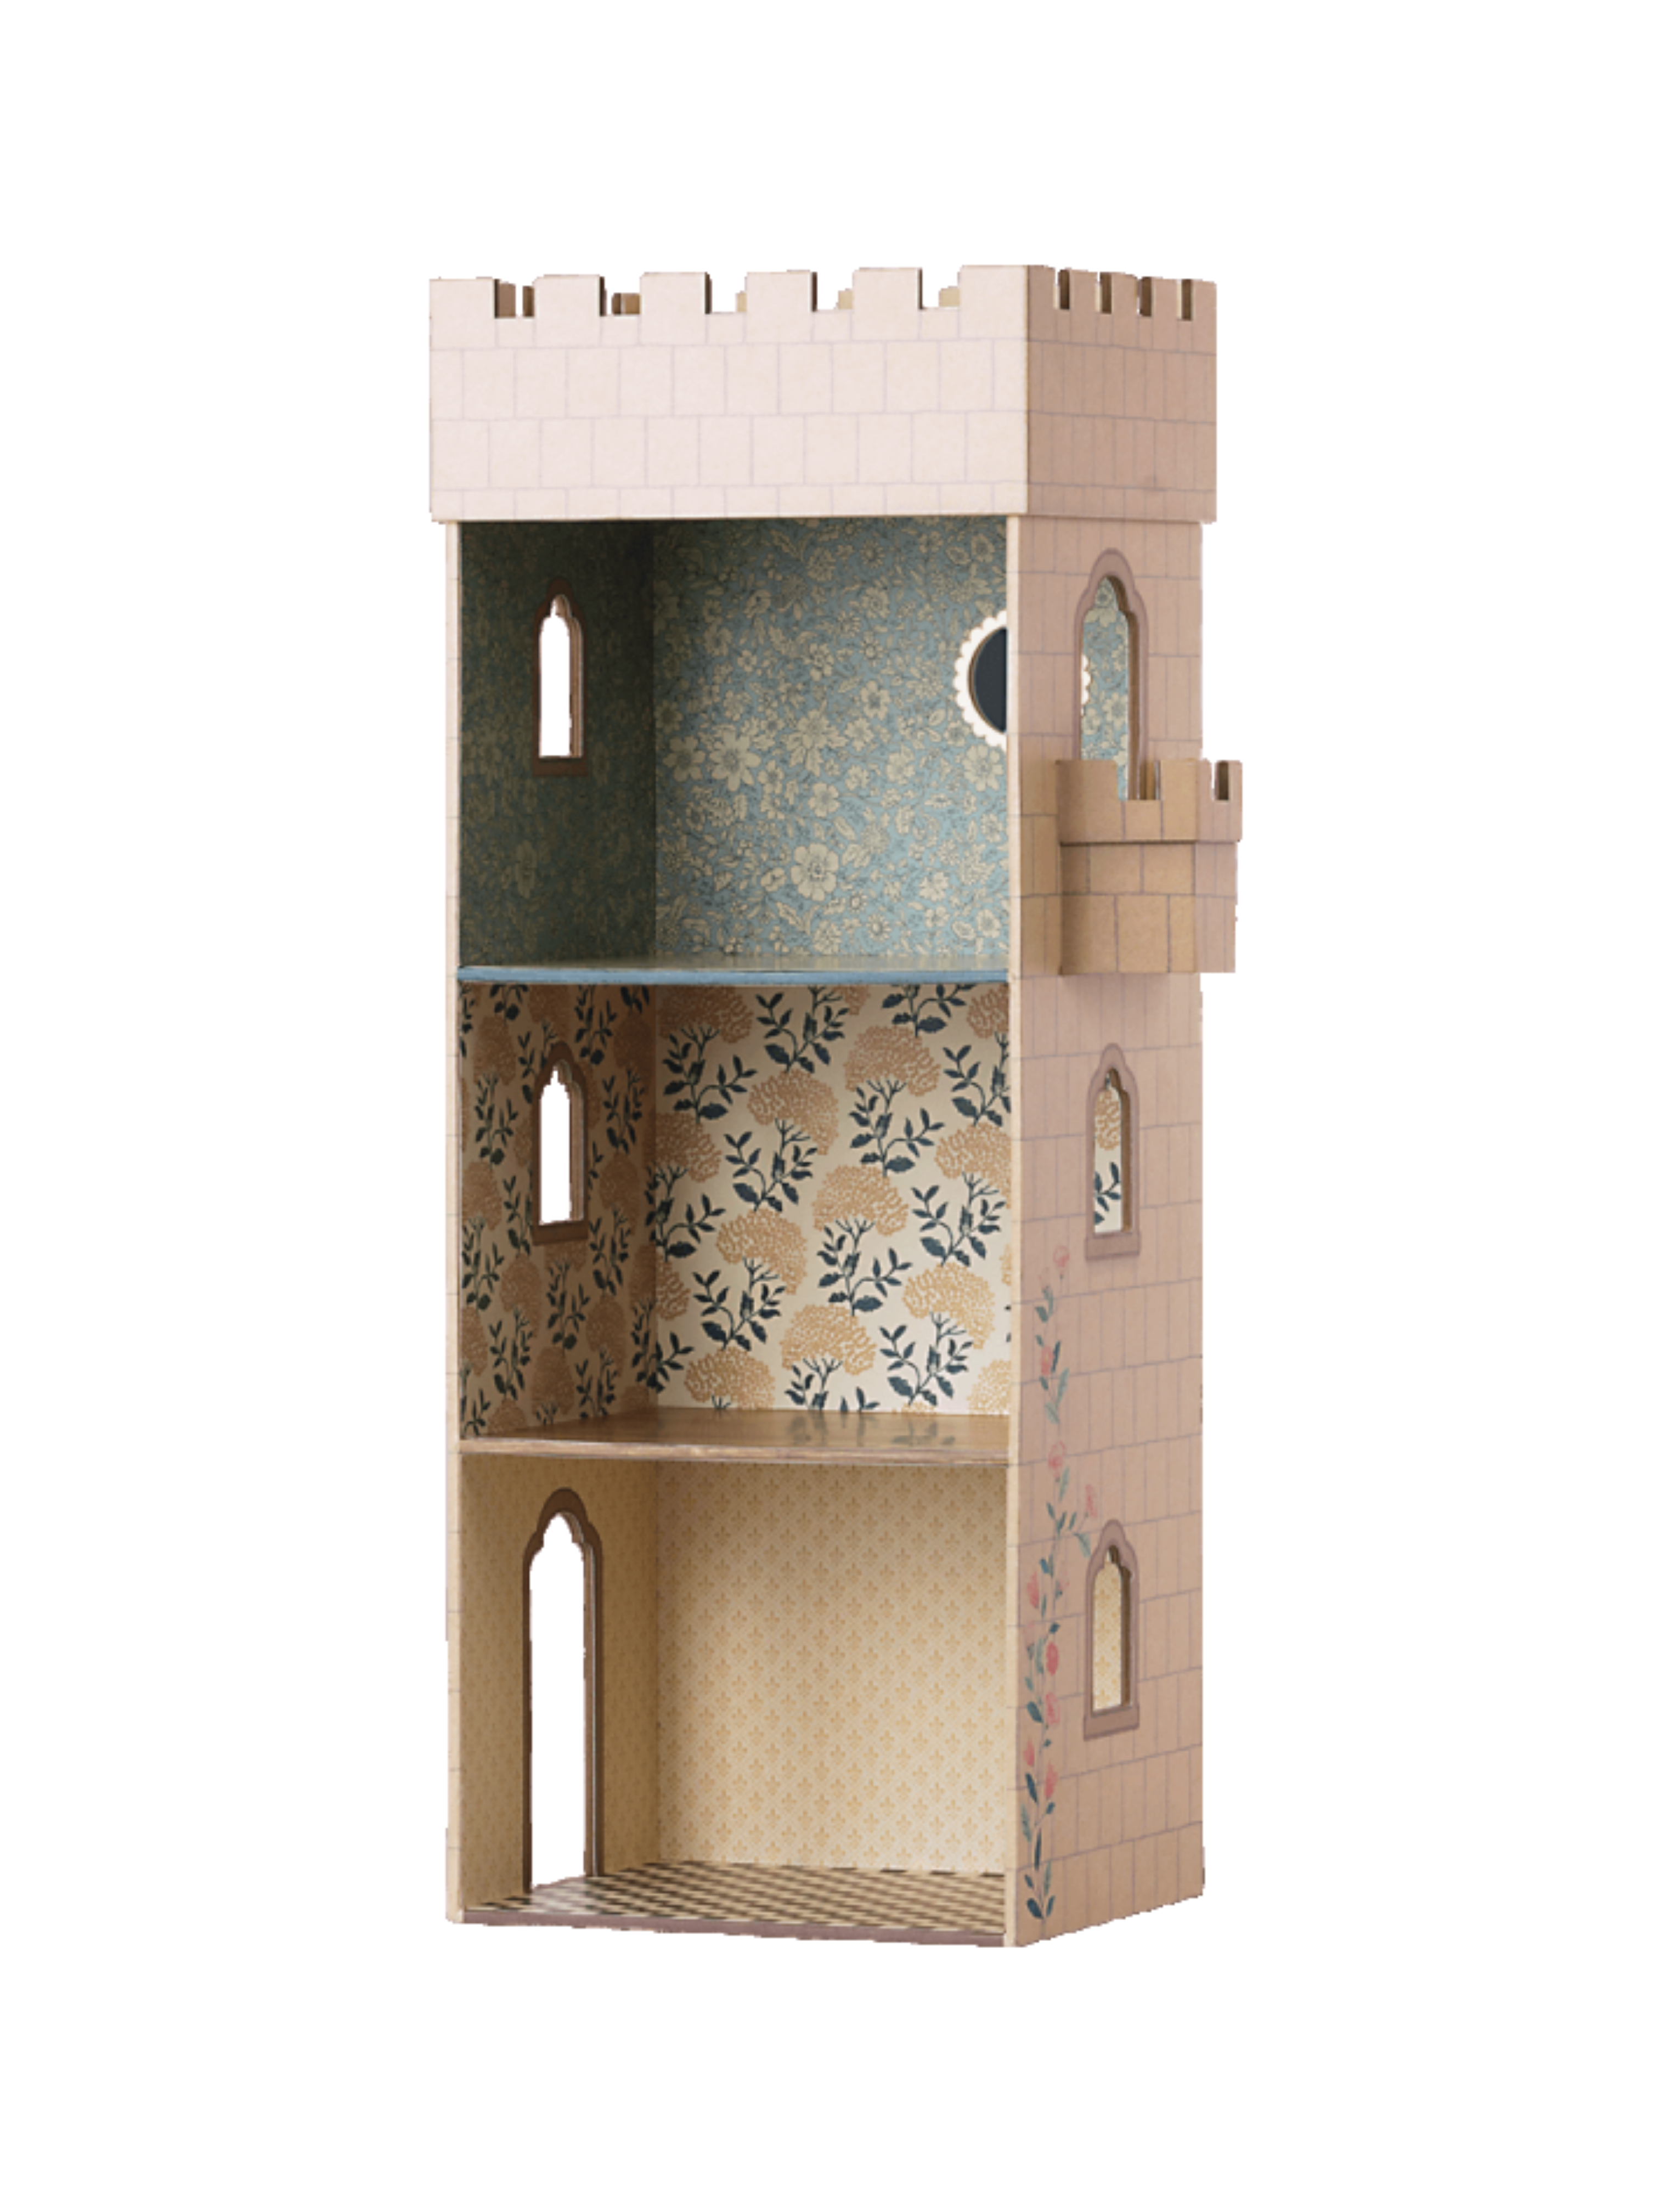 Mouse Castle with Mirror - Charming Maileg Dollhouse Set